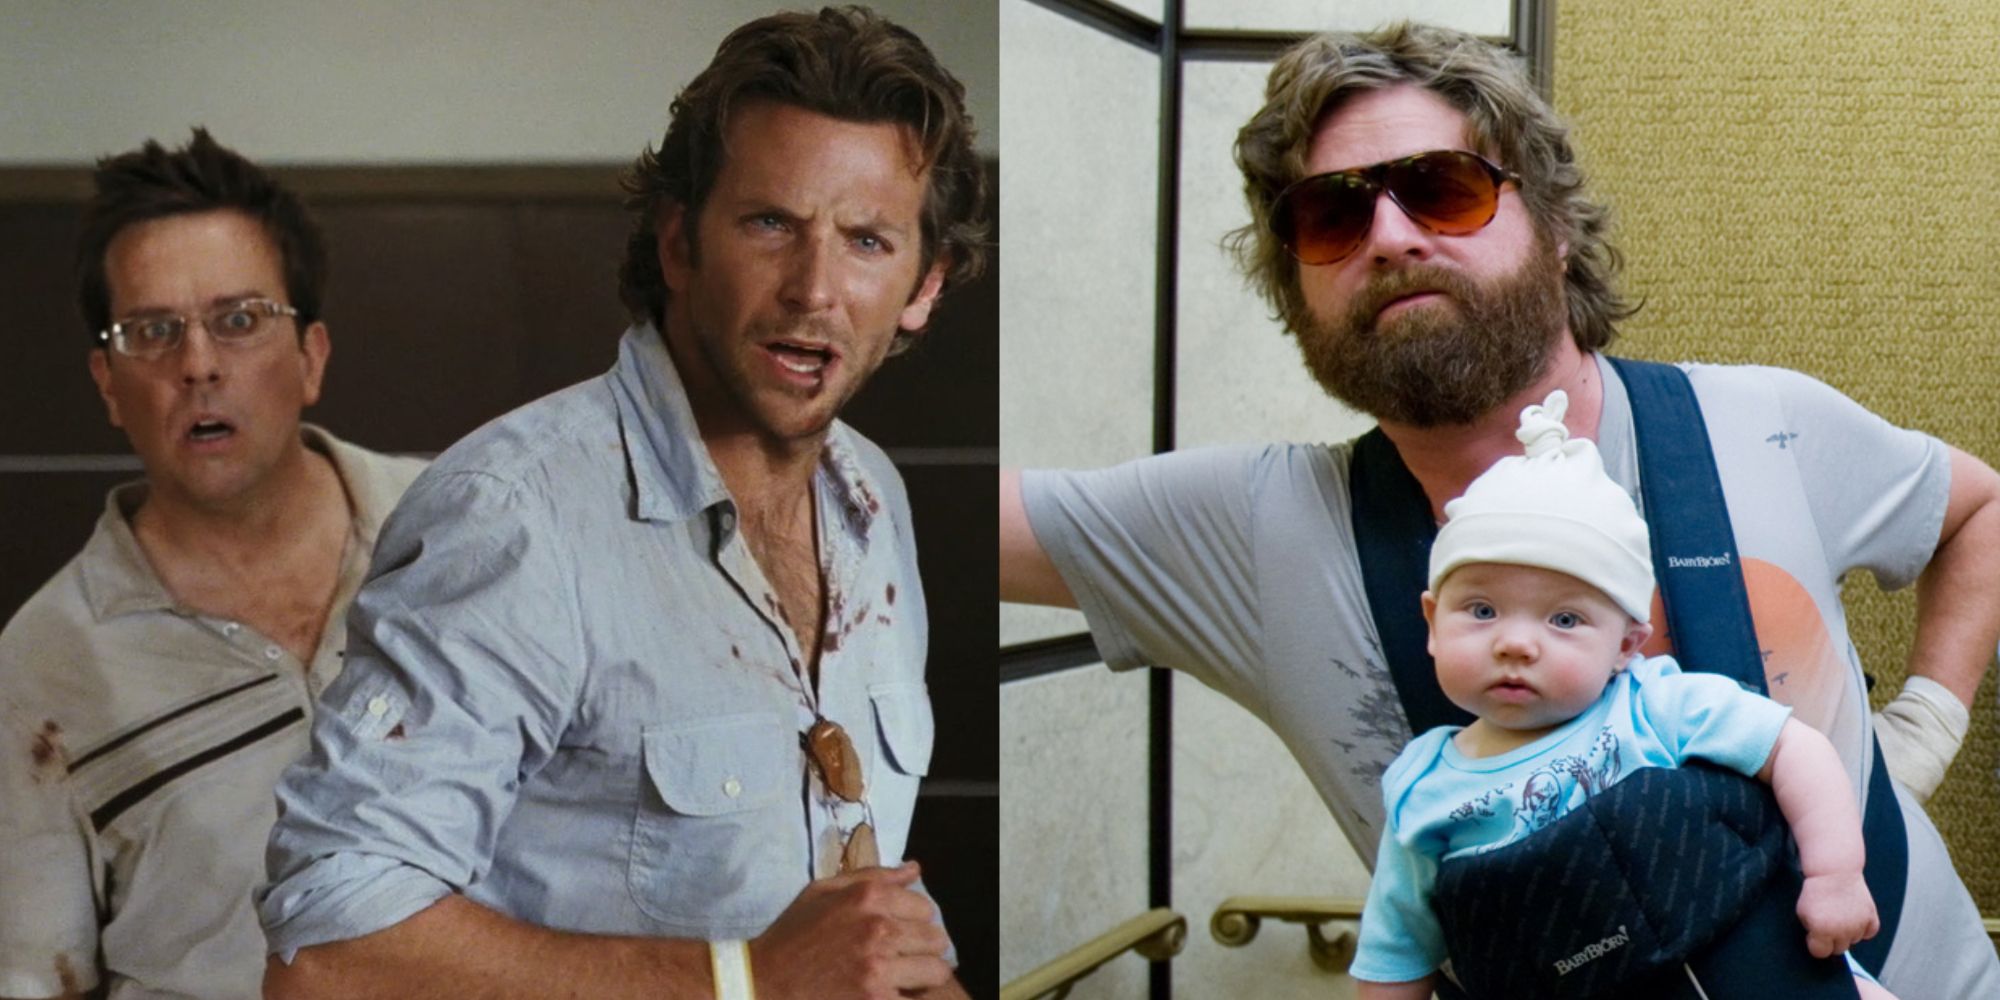 Mathematical Thoughts in the Hangover